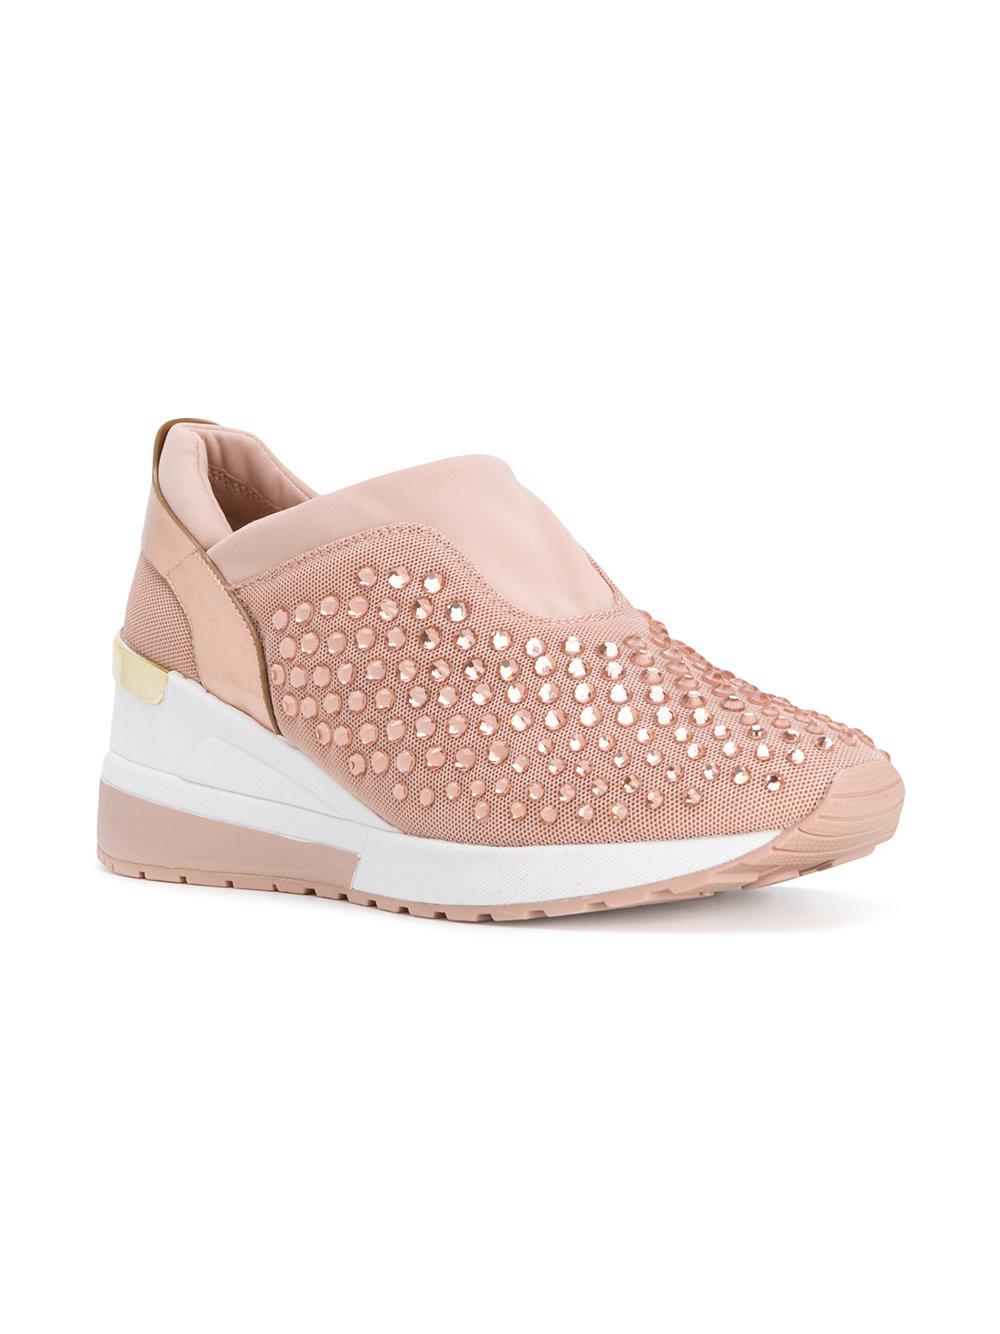 Michael Kors Synthetic Maloy Sneakers in Pink & Purple